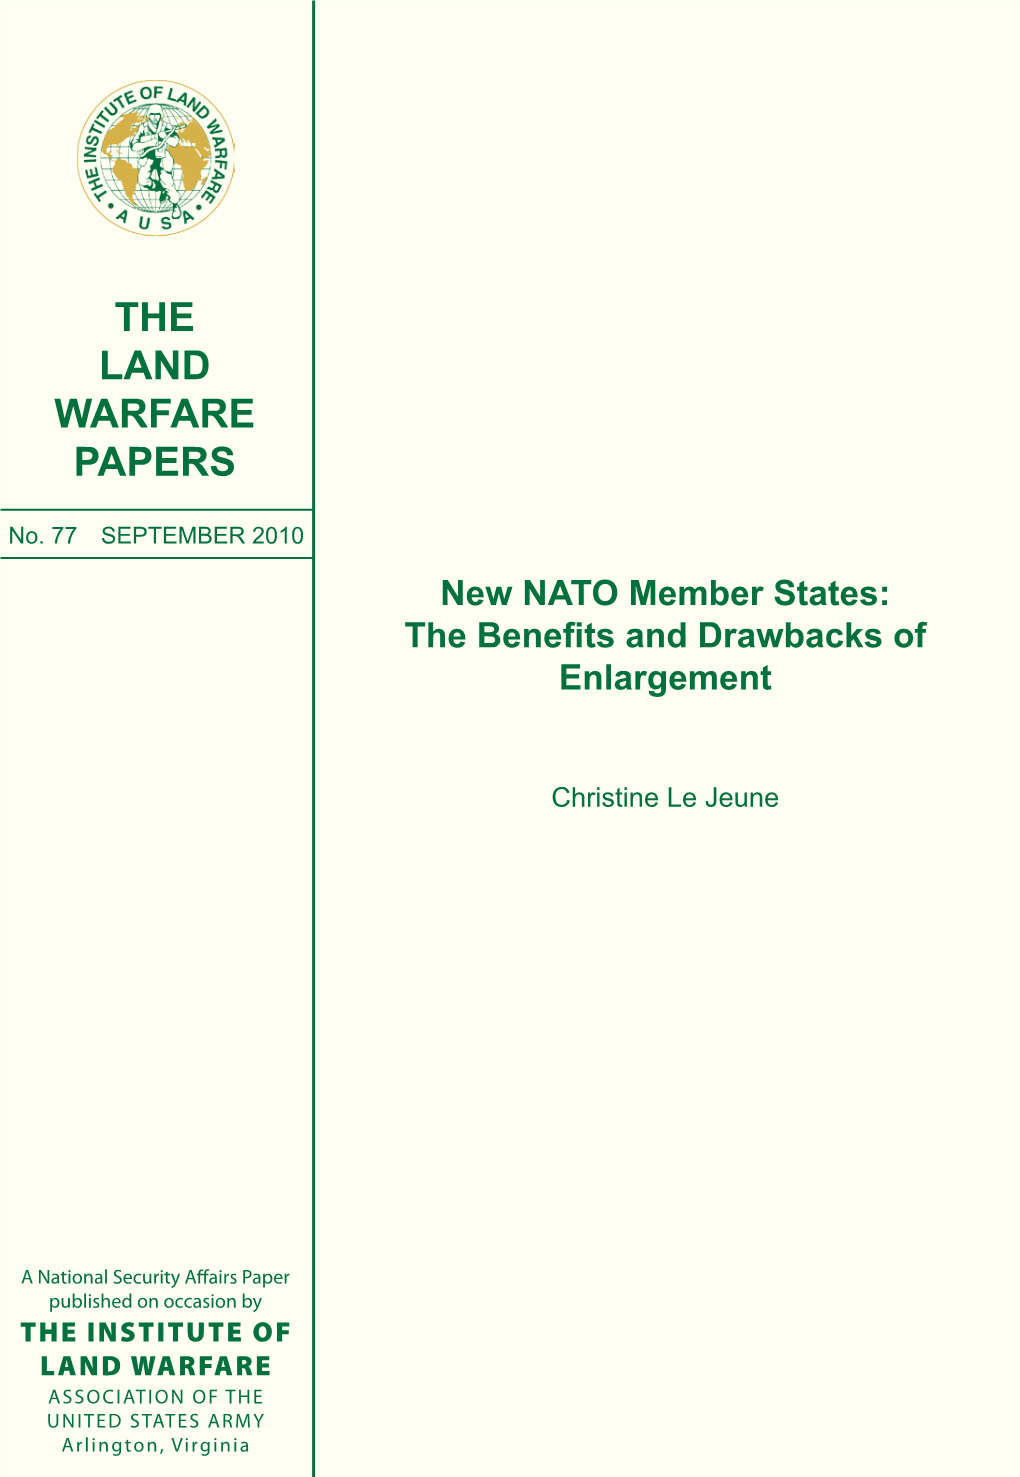 New NATO Member States: the Benefits and Drawbacks of Enlargement